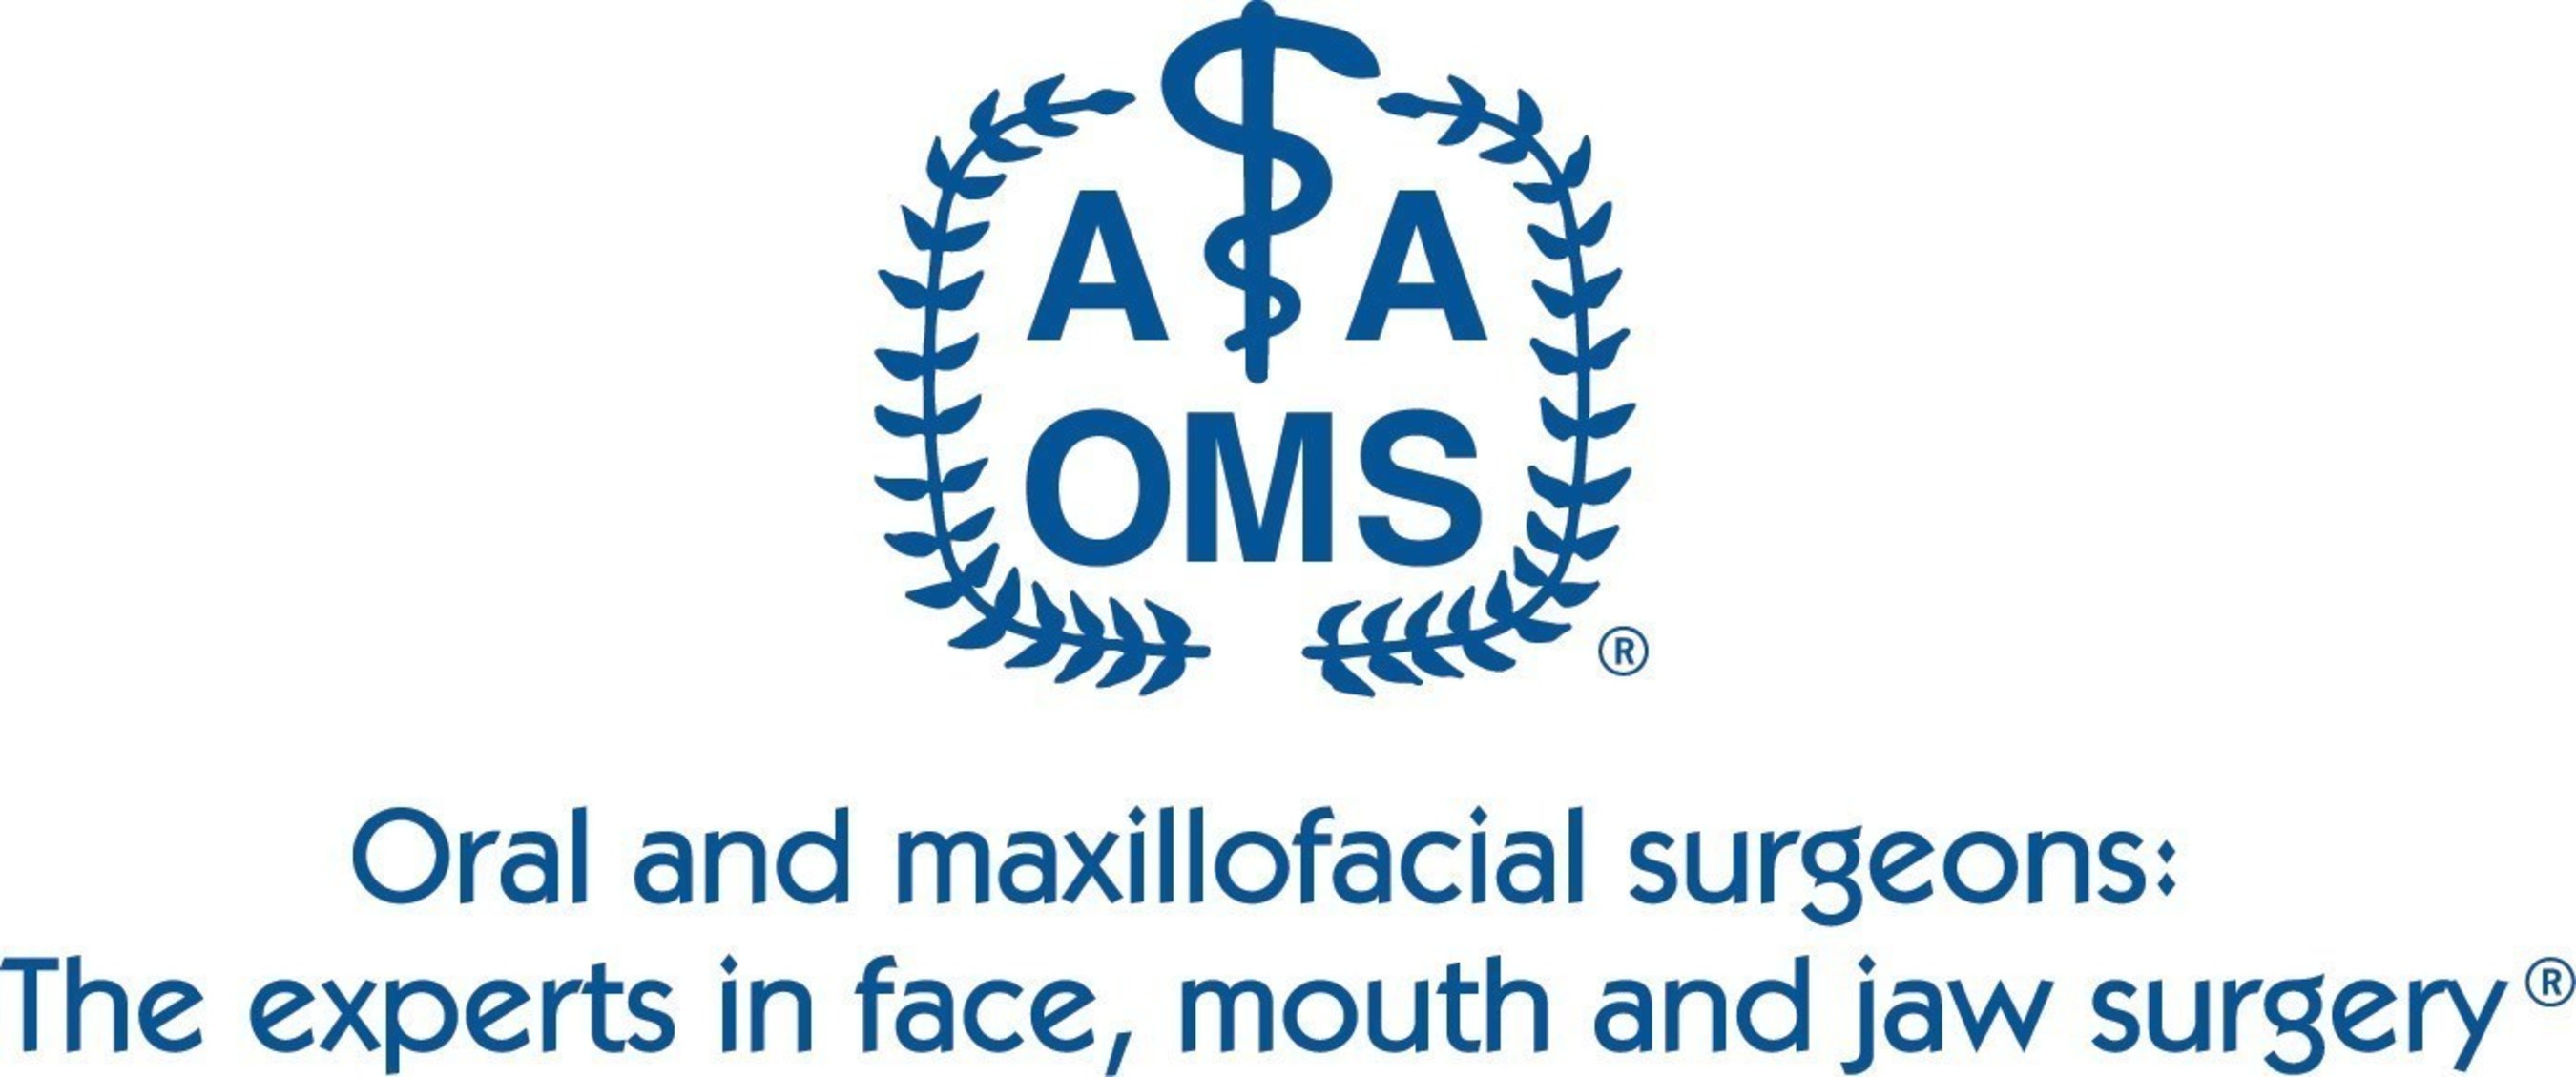 The experts in face, mouth and jaw surgery(TM) - The American Association of Oral and Maxillofacial Surgeons (AAOMS), the professional organization representing more than 9,500 oral and maxillofacial surgeons in the United States, supports its fellows' and members' ability to practice their specialty through education, research and advocacy. AAOMS fellows and members comply with rigorous continuing education requirements and submit to periodic office anesthesia evaluations.  Visit MyOMS.org for additional information about oral and facial surgery.